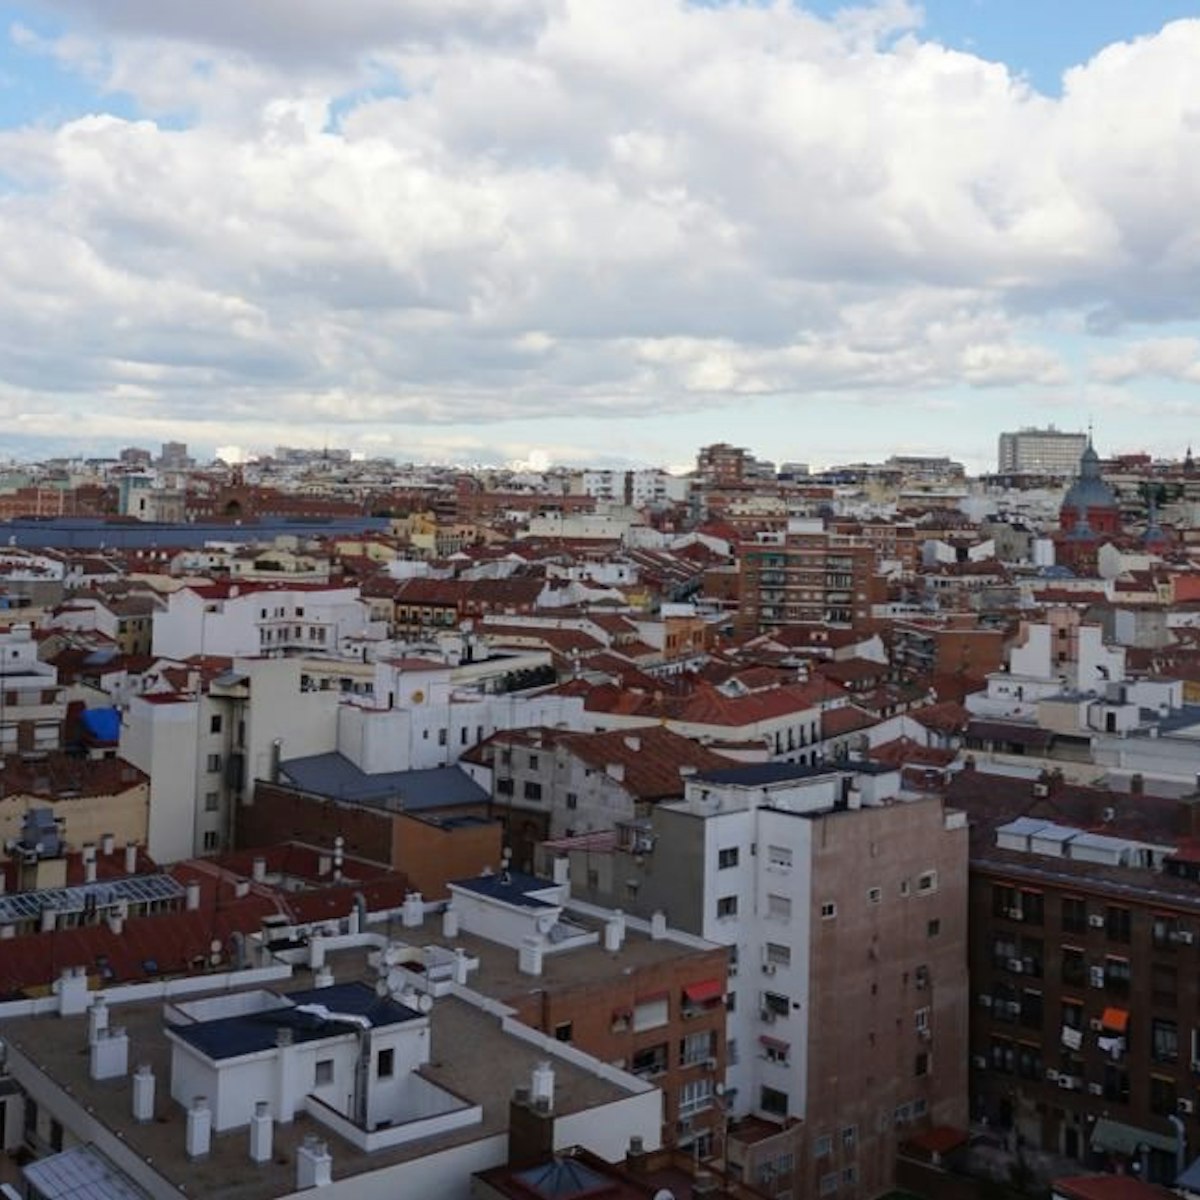 The view of Madrid from Nice to Meet You.